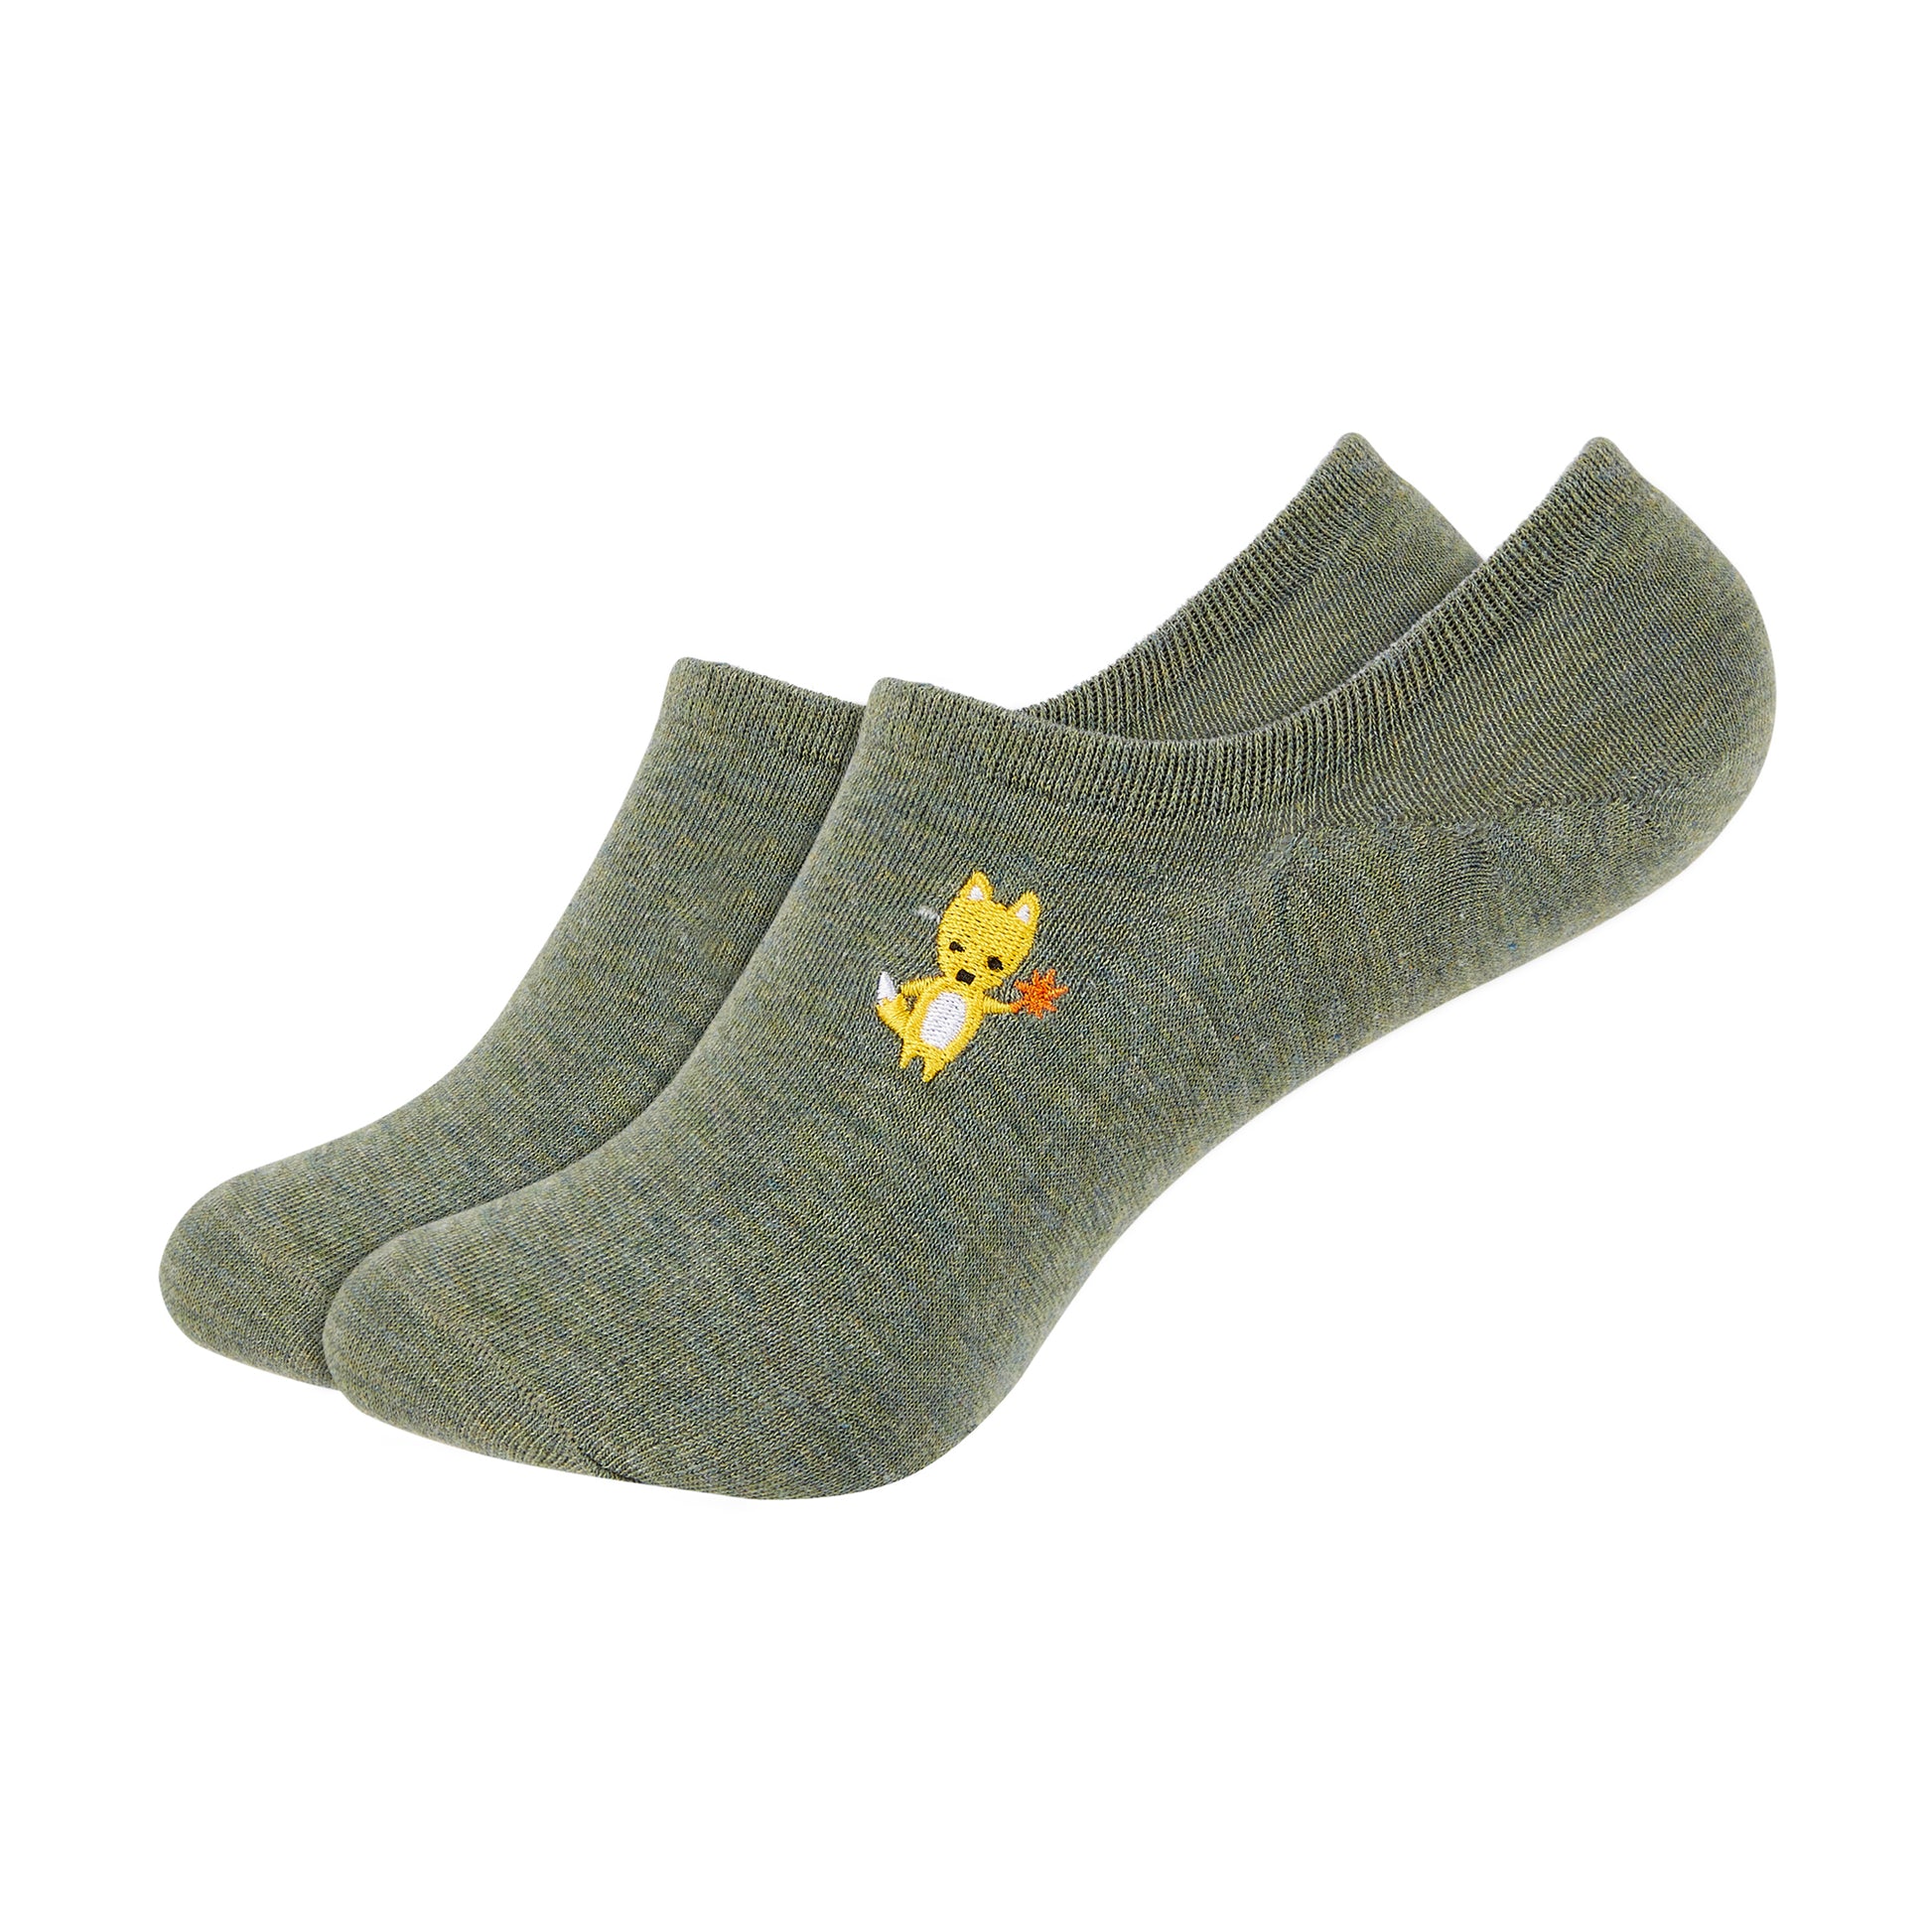 Women's Colored Plain Invisible Foot Socks with Animal Patch - IDENTITY Apparel Shop